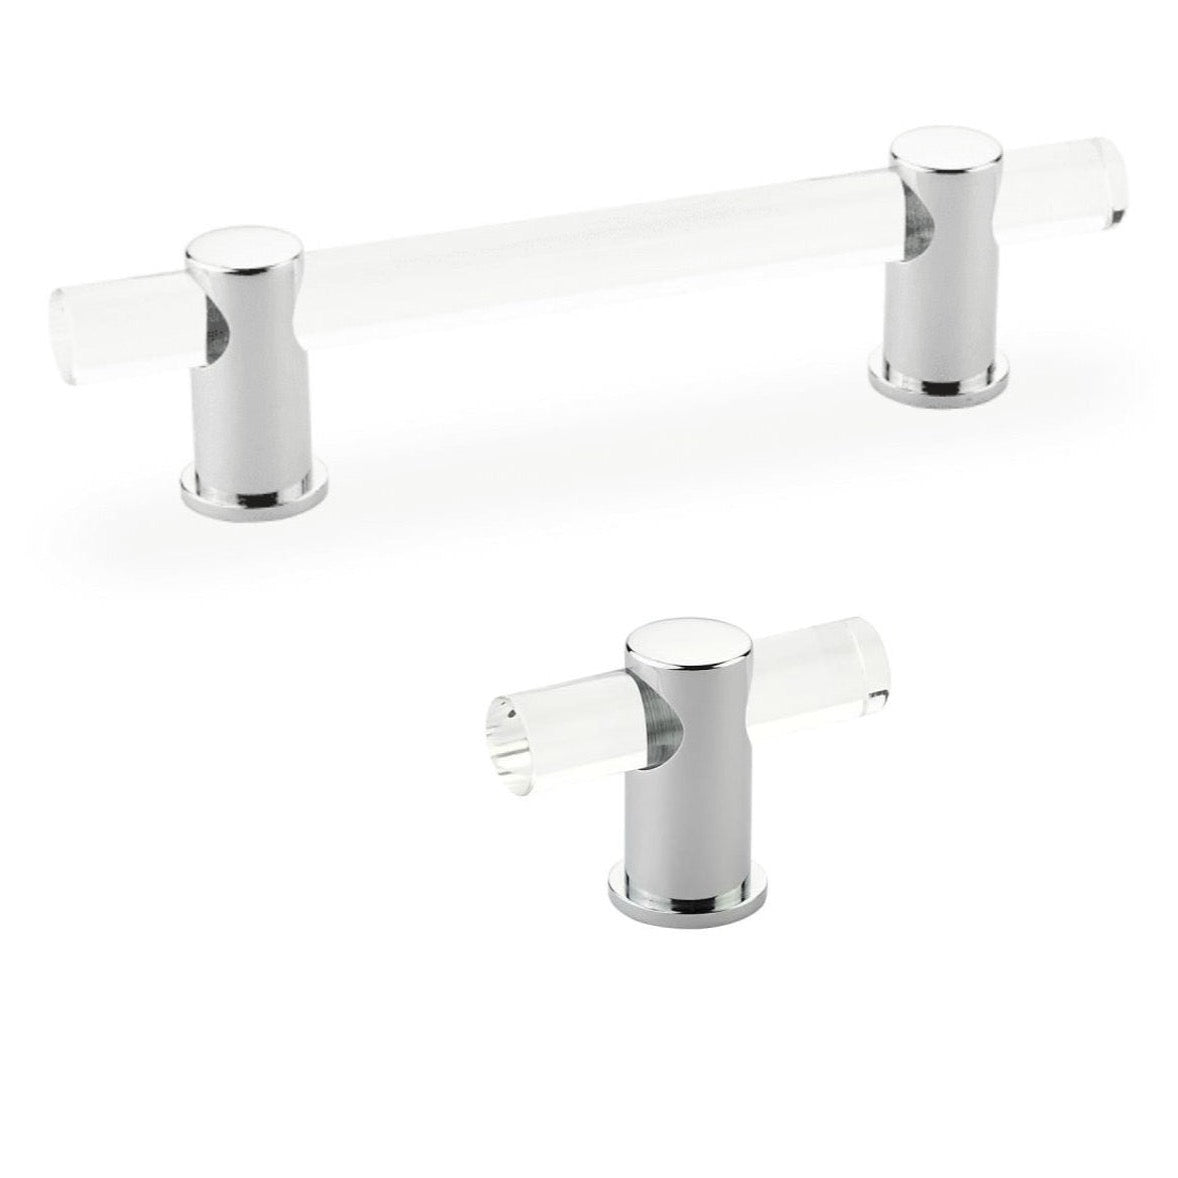 Polished Chrome and Lucite "Gleam" Cabinet Knobs and Drawer Pulls (Adjustable) - Forge Hardware Studio